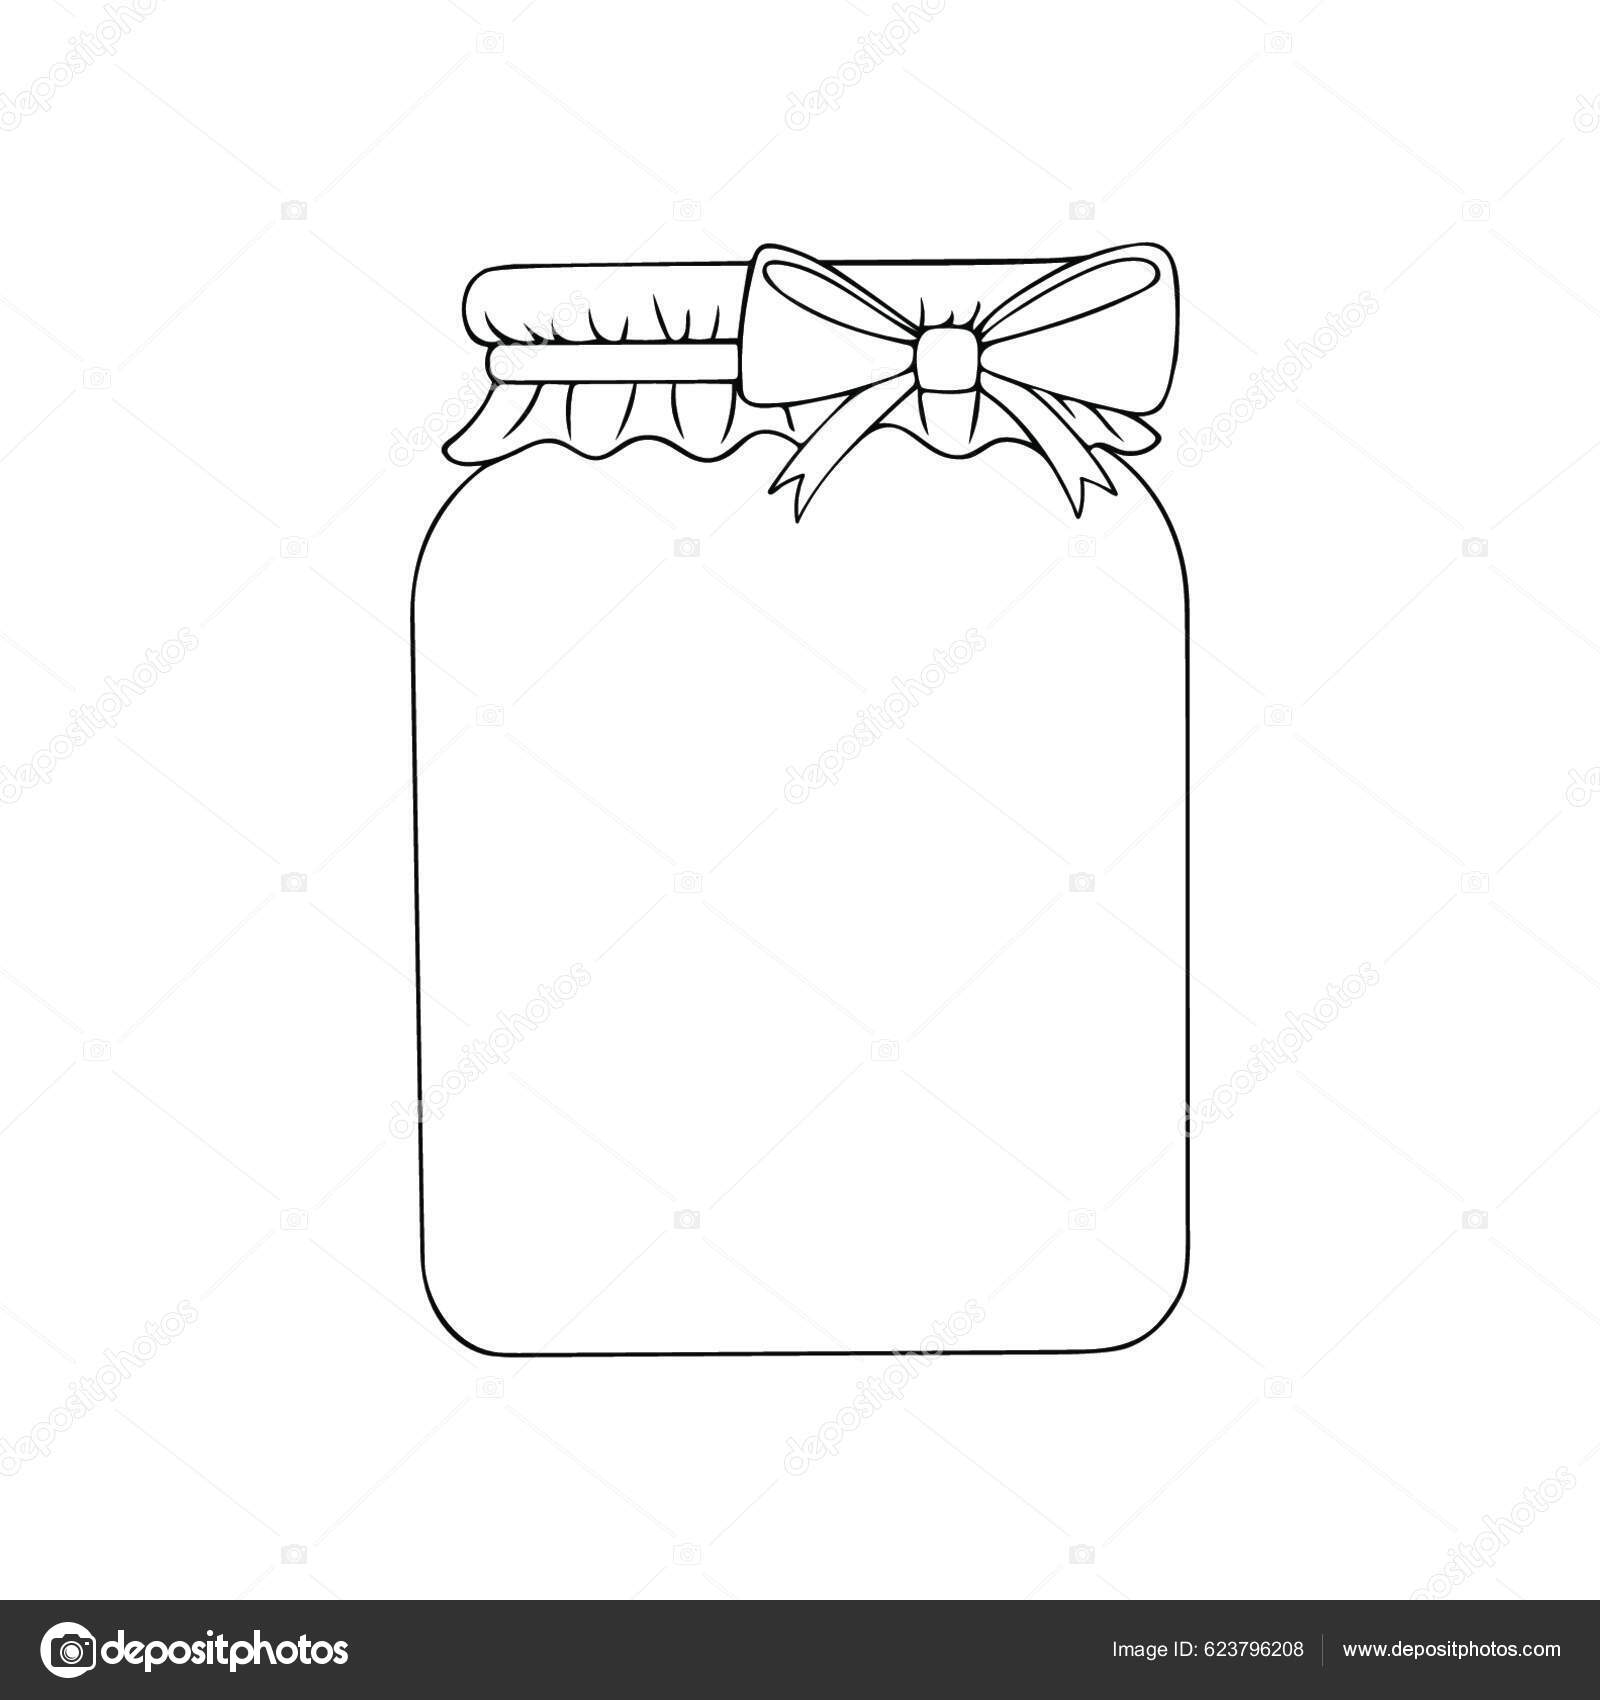 Coloring Book Glass Jar Line Art Empty Bowl Jam Hand Stock Vector by  ©YAY_Images 623796208